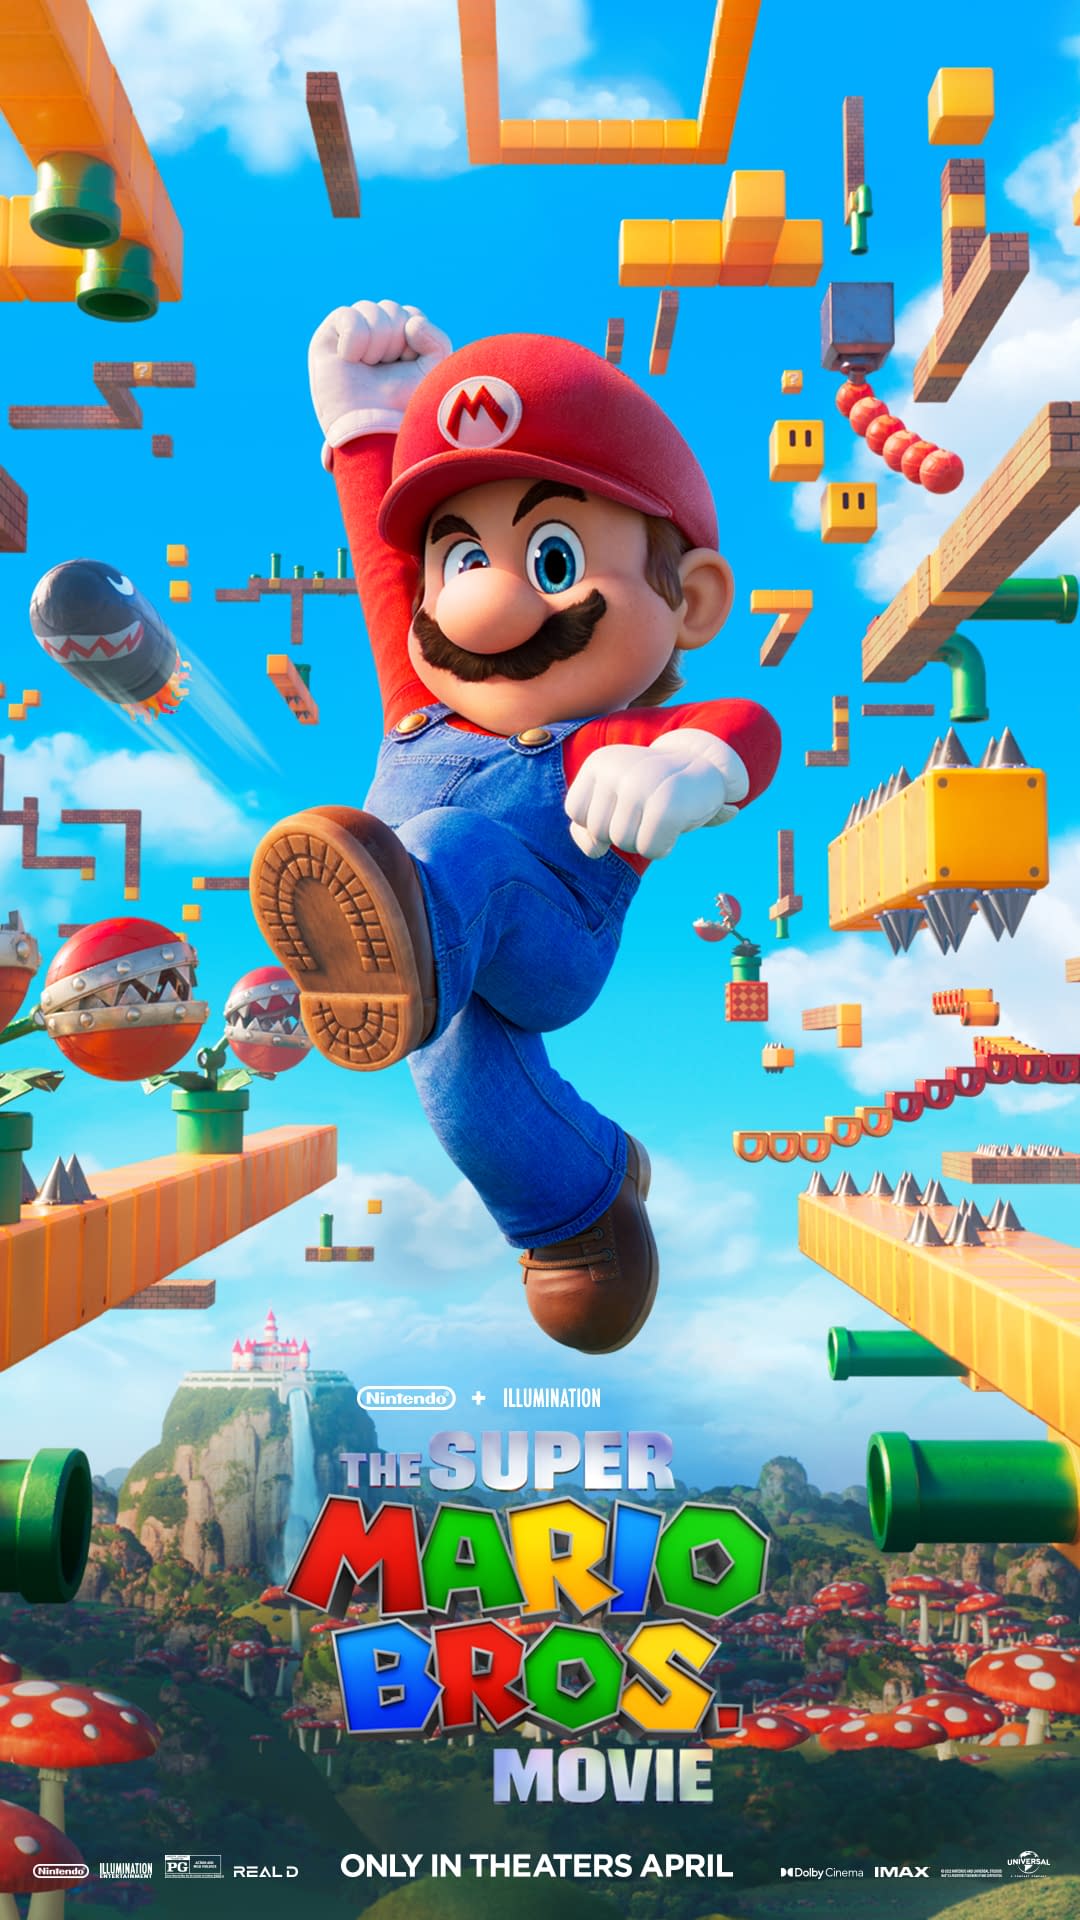 The Super Mario Bros. Movie Plumbing Commercial And Character Posters